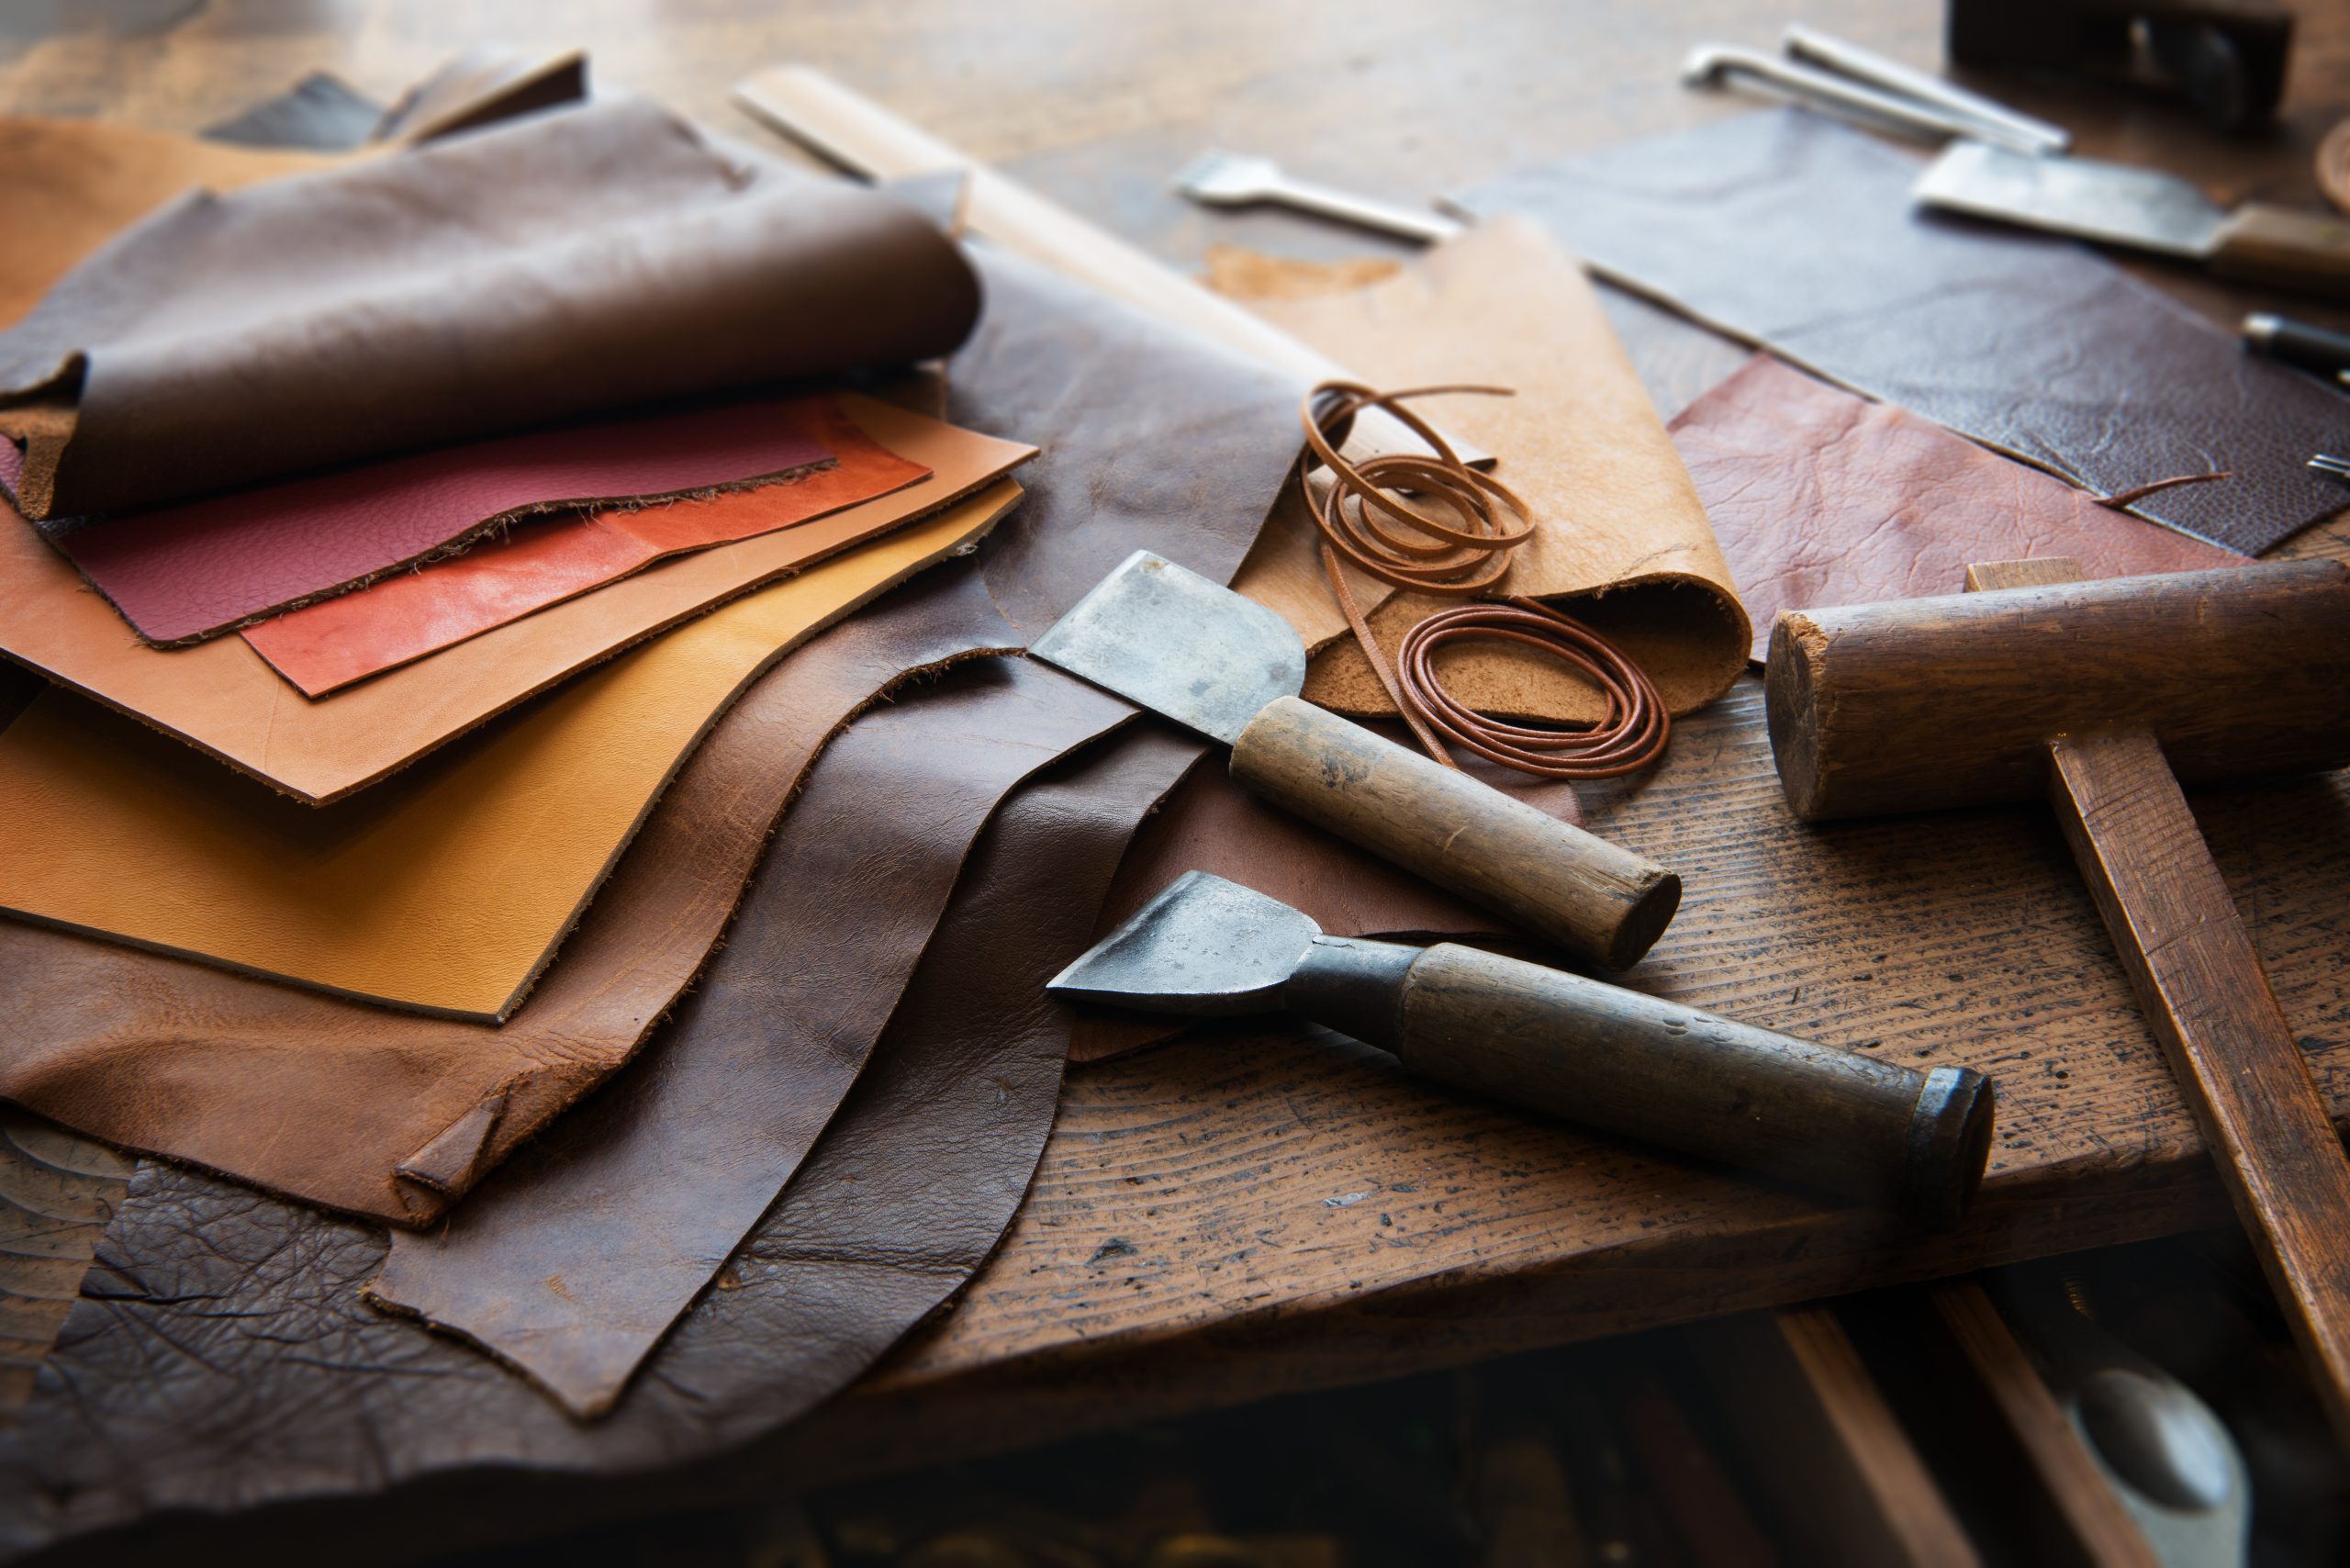 Veterans leather competition now accepting submissions - VA News